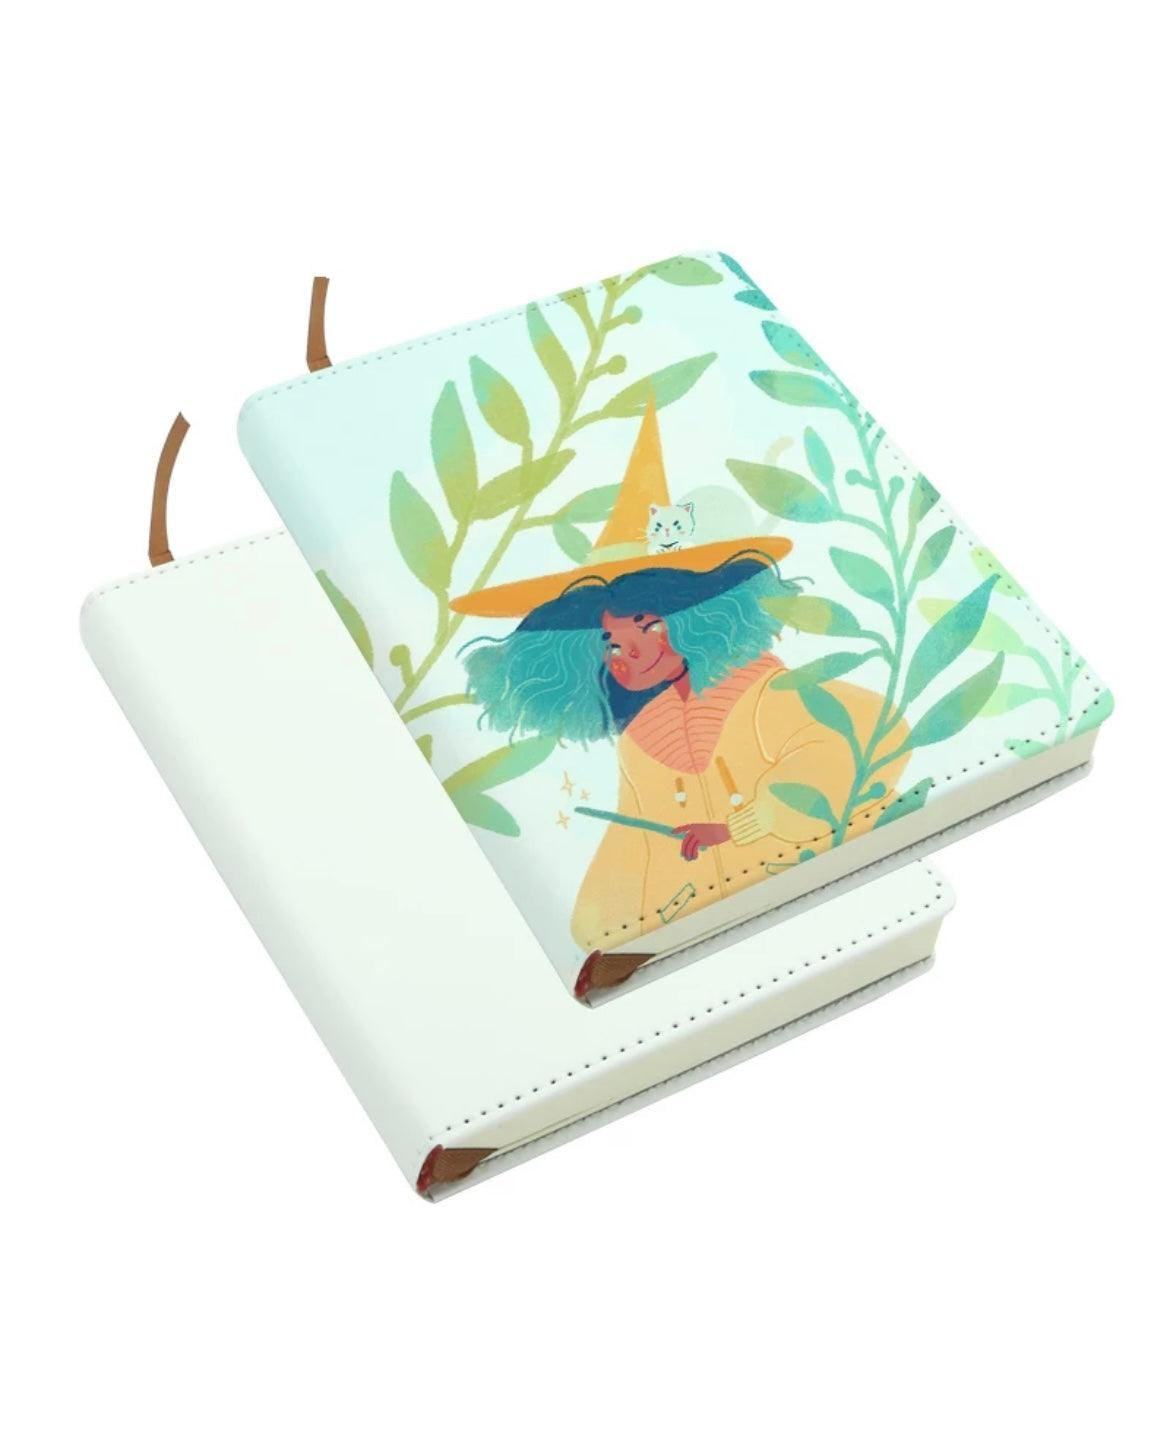 Sublimation Notebook Blank - A5 A6 A4 Sublimation Journals Blank , Glossy  Faux Leather Journal Diary Blank For Customize